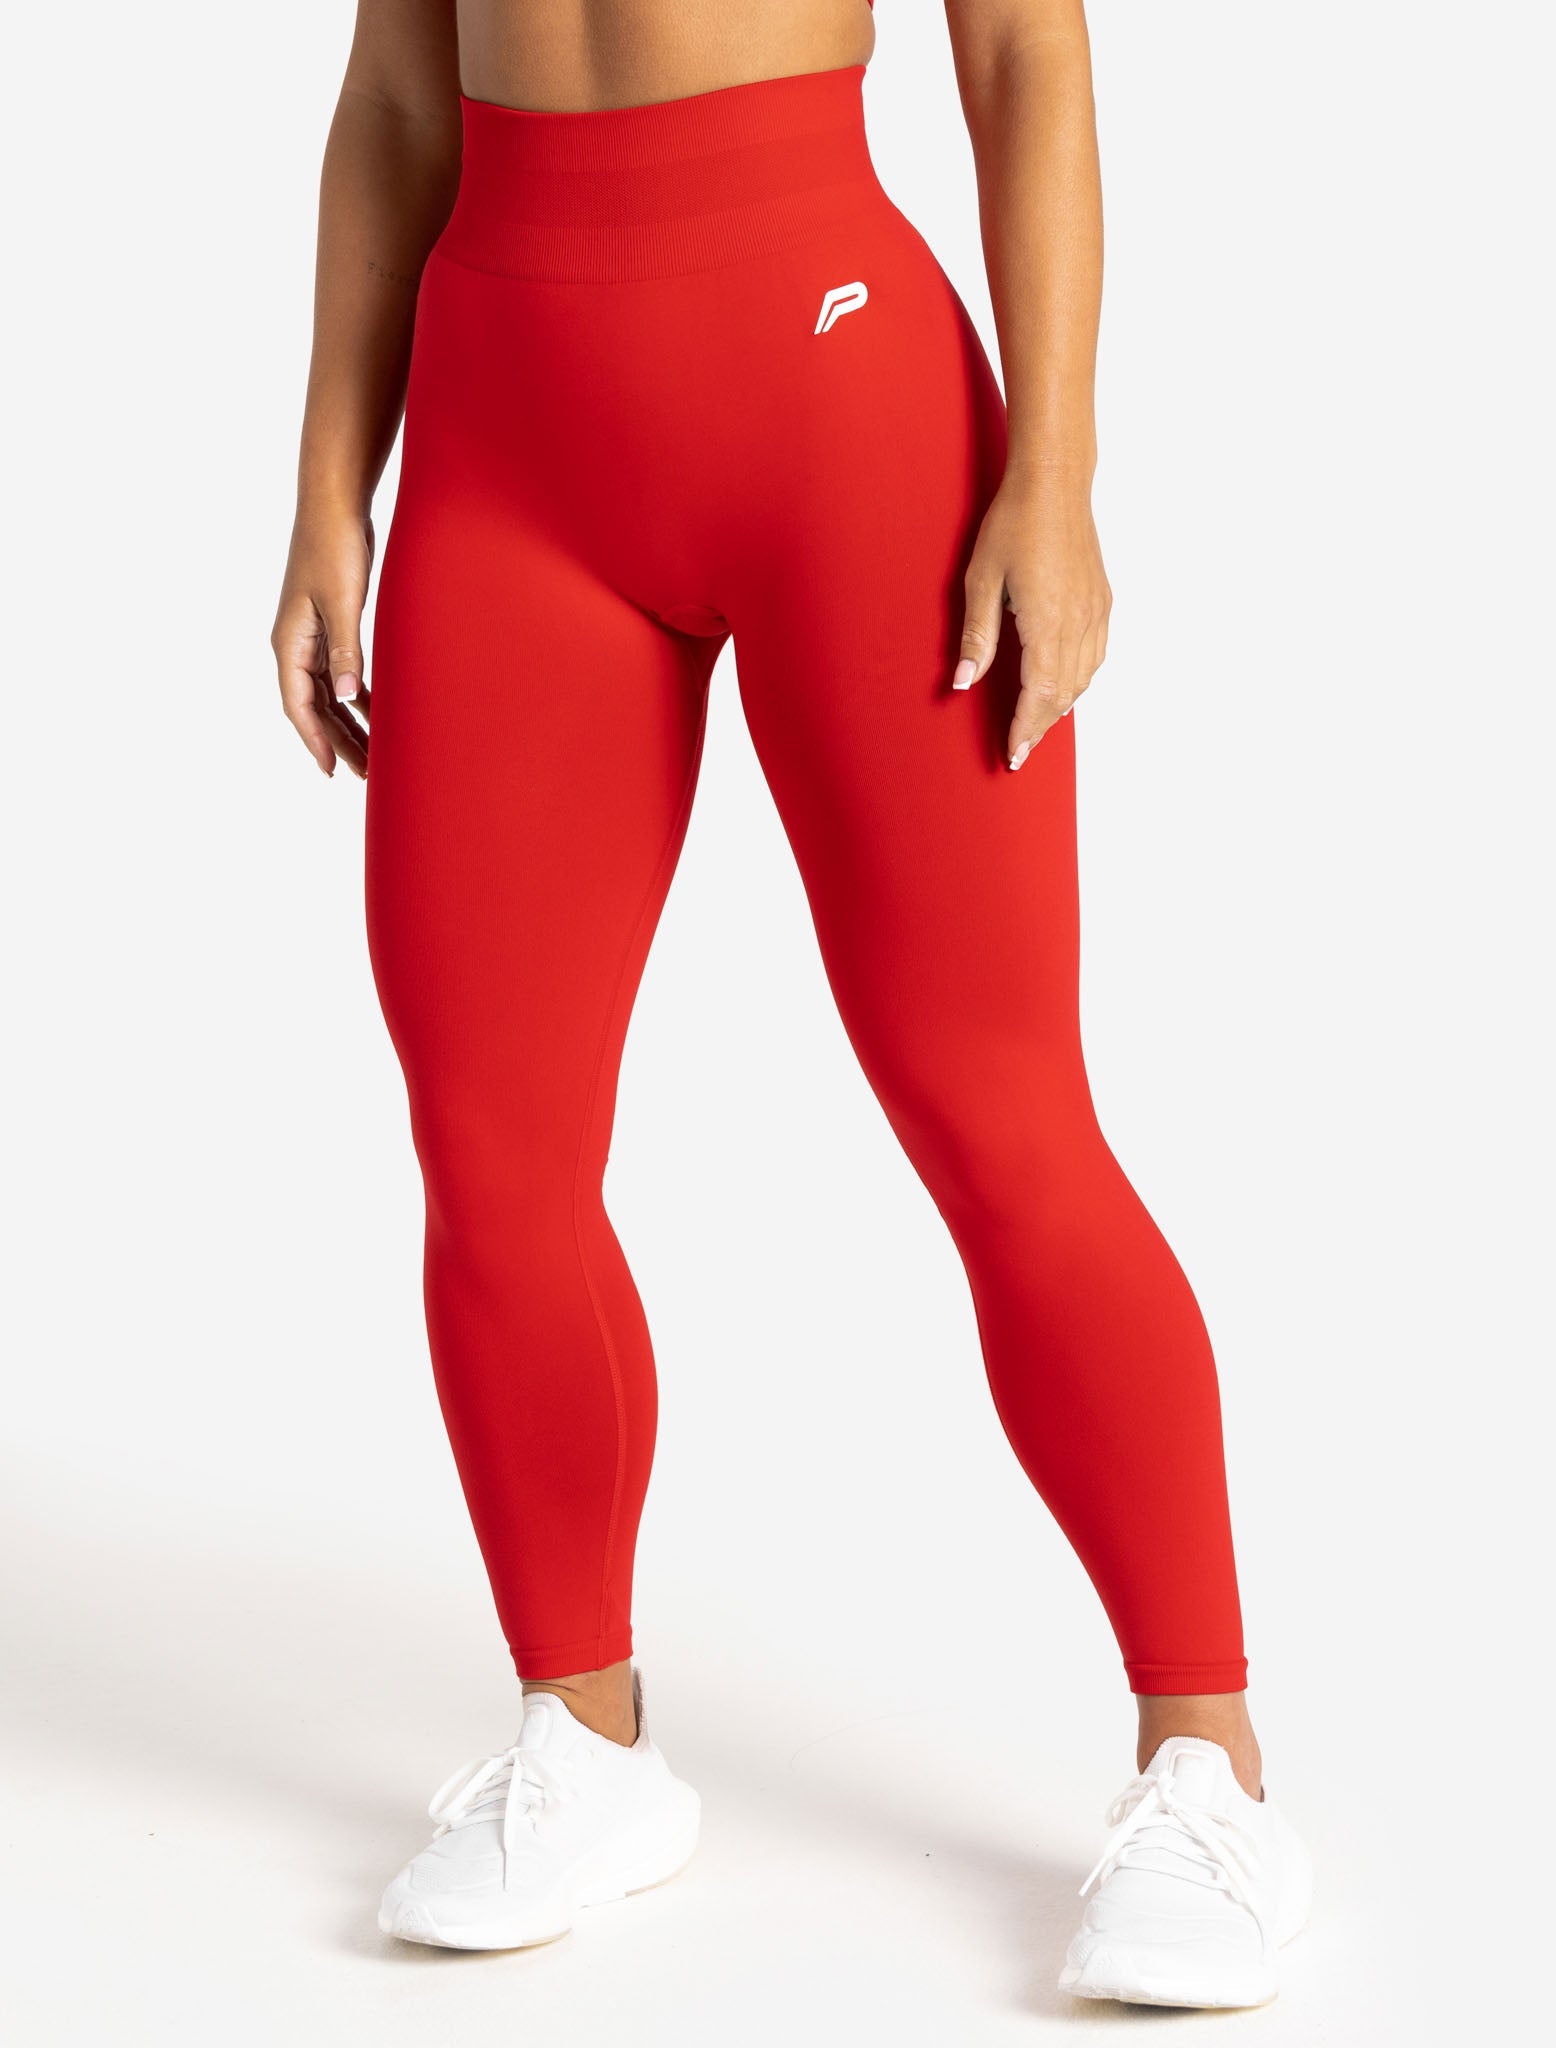 Scrunch Seamless Leggings / Candy Red Pursue Fitness 1